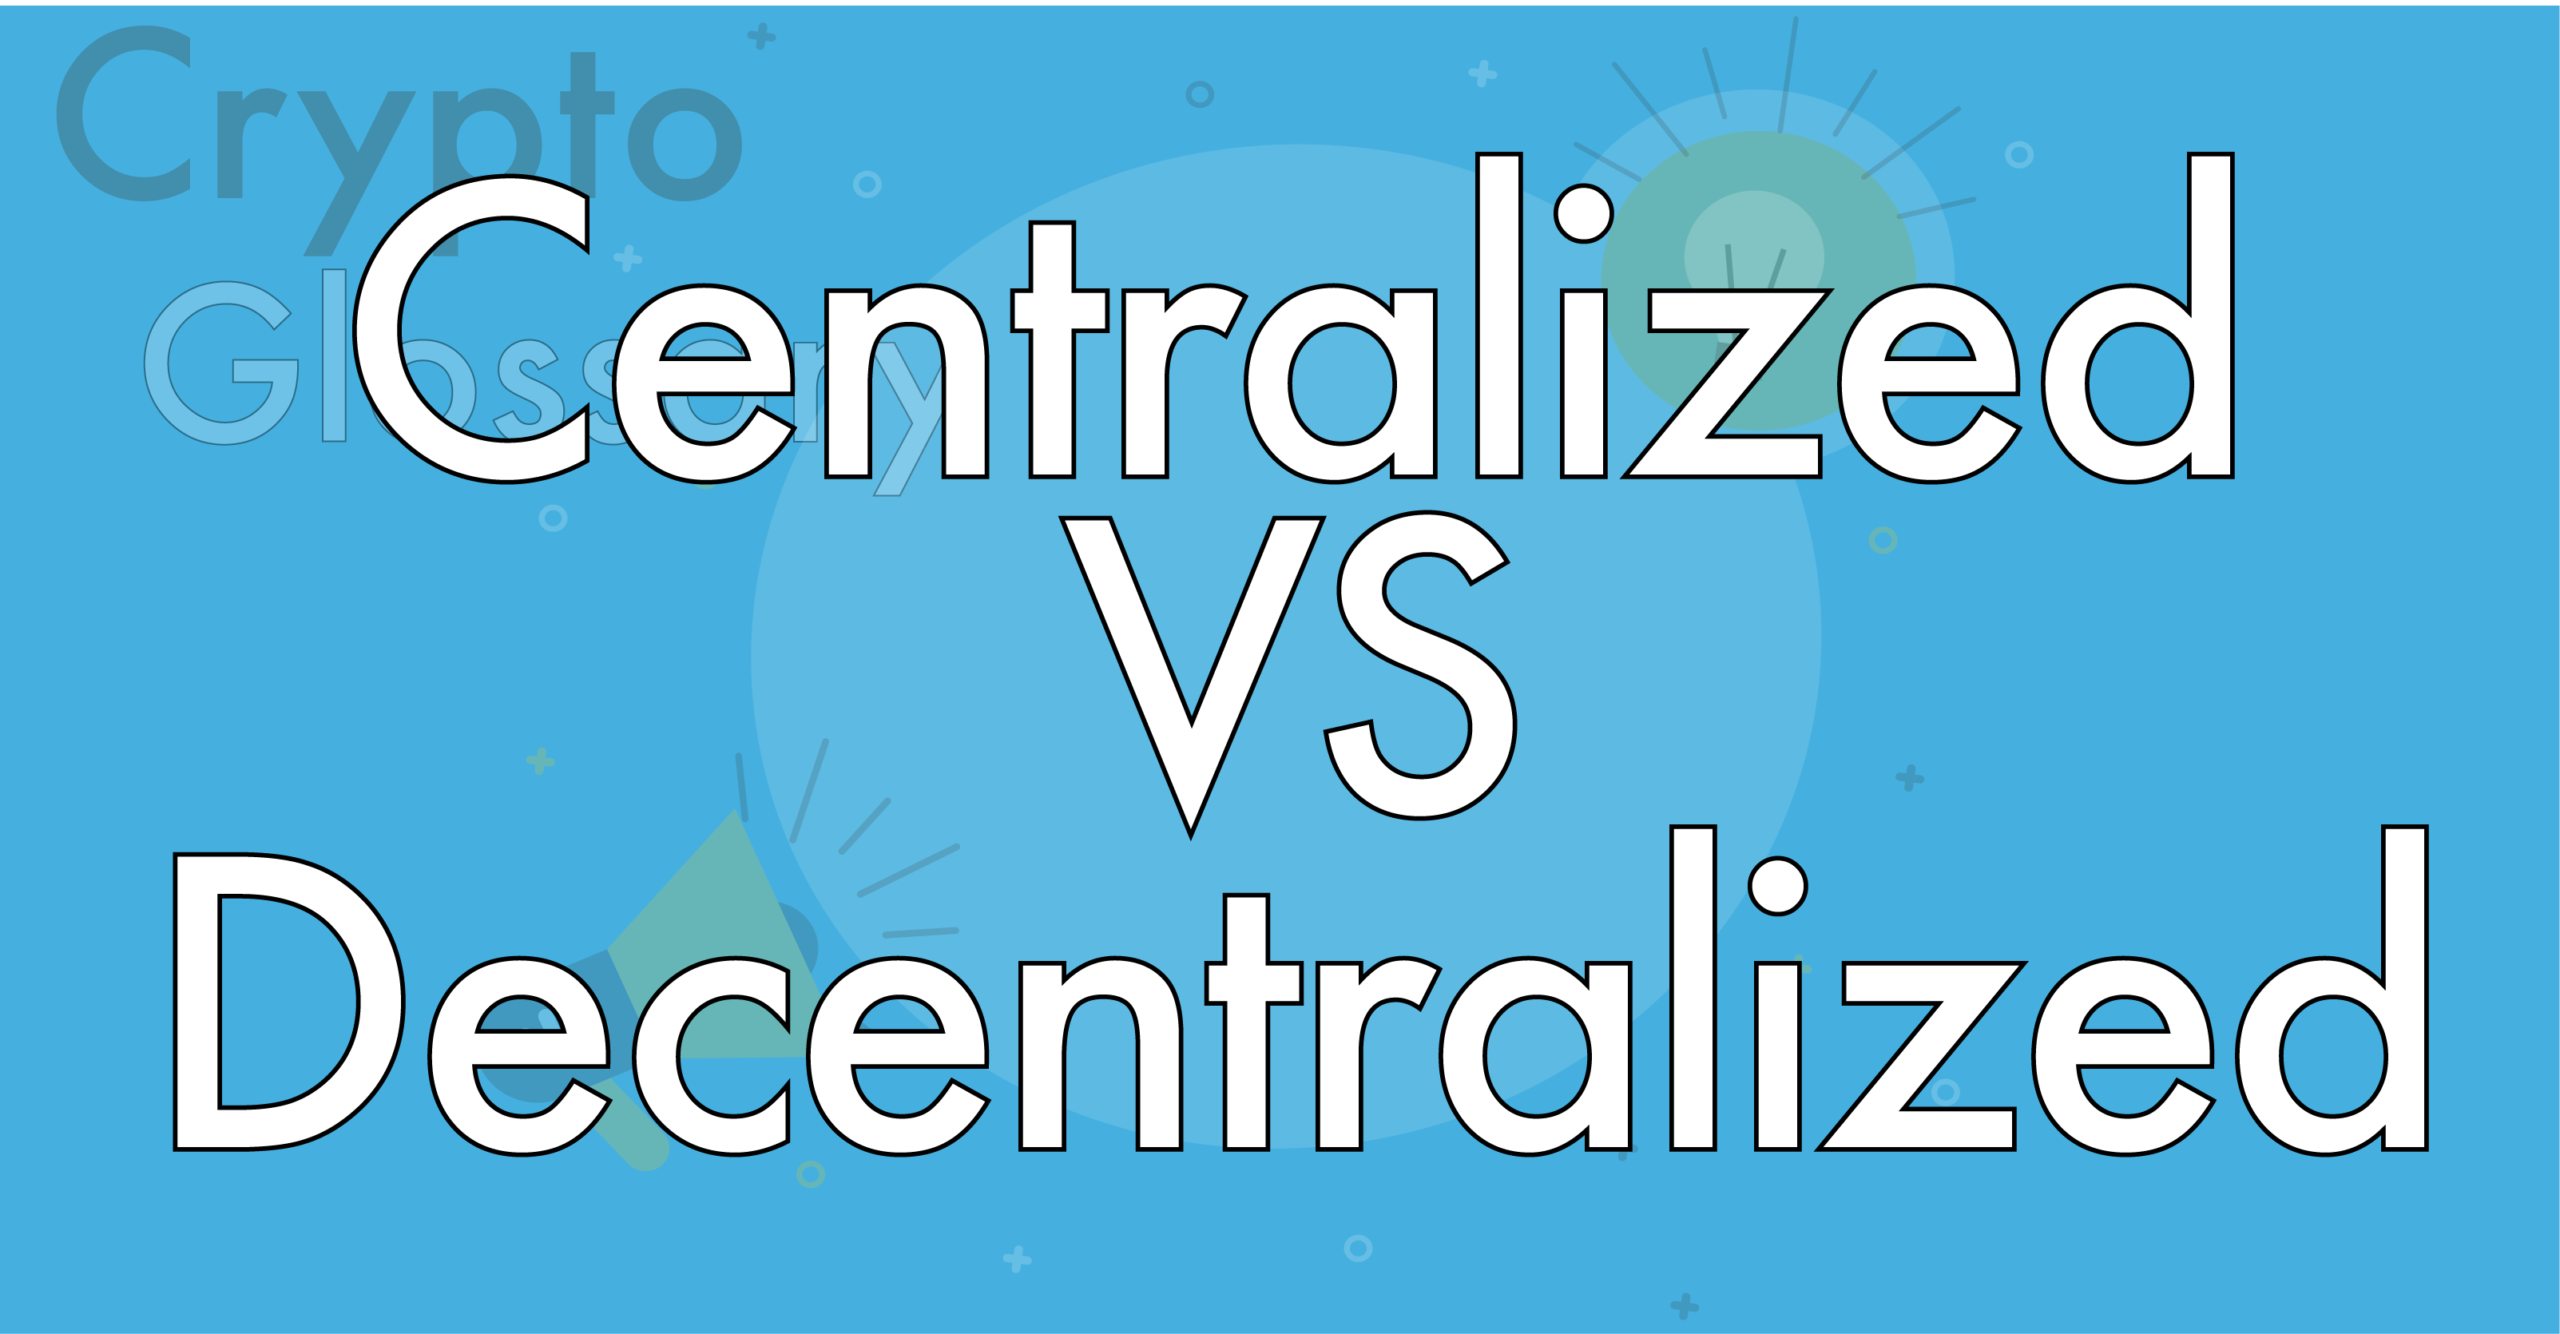 What is the Difference Between Centralized and Decentralized?